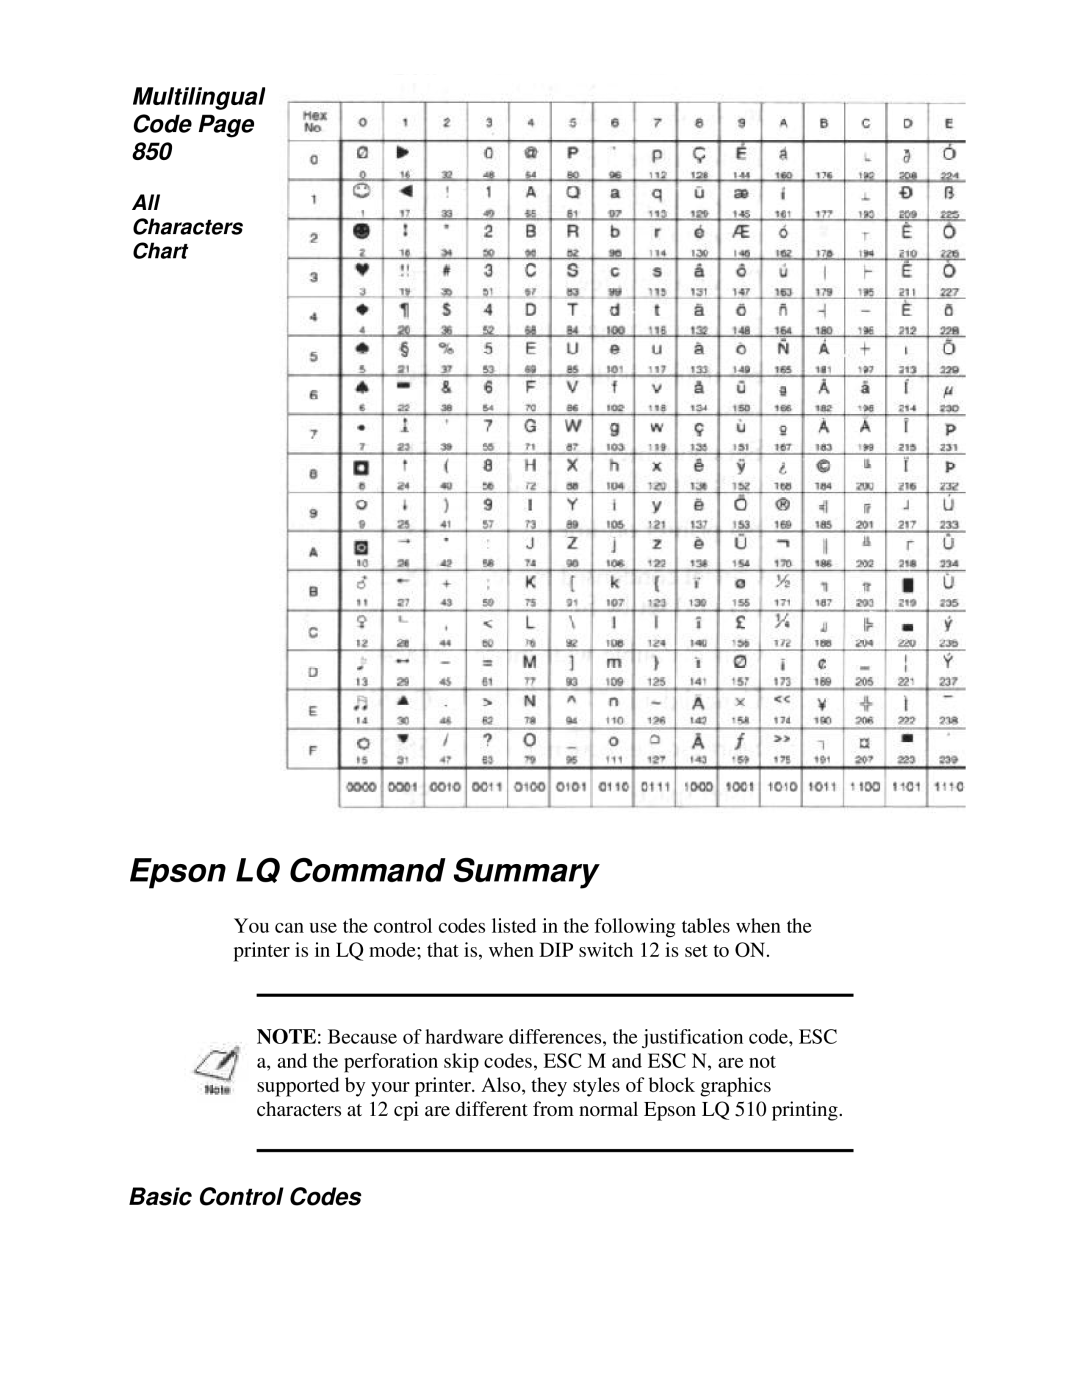 Canon BJ-230 user manual Epson LQ Command Summary, Multilingual Code Page, Basic Control Codes, All Characters Chart 